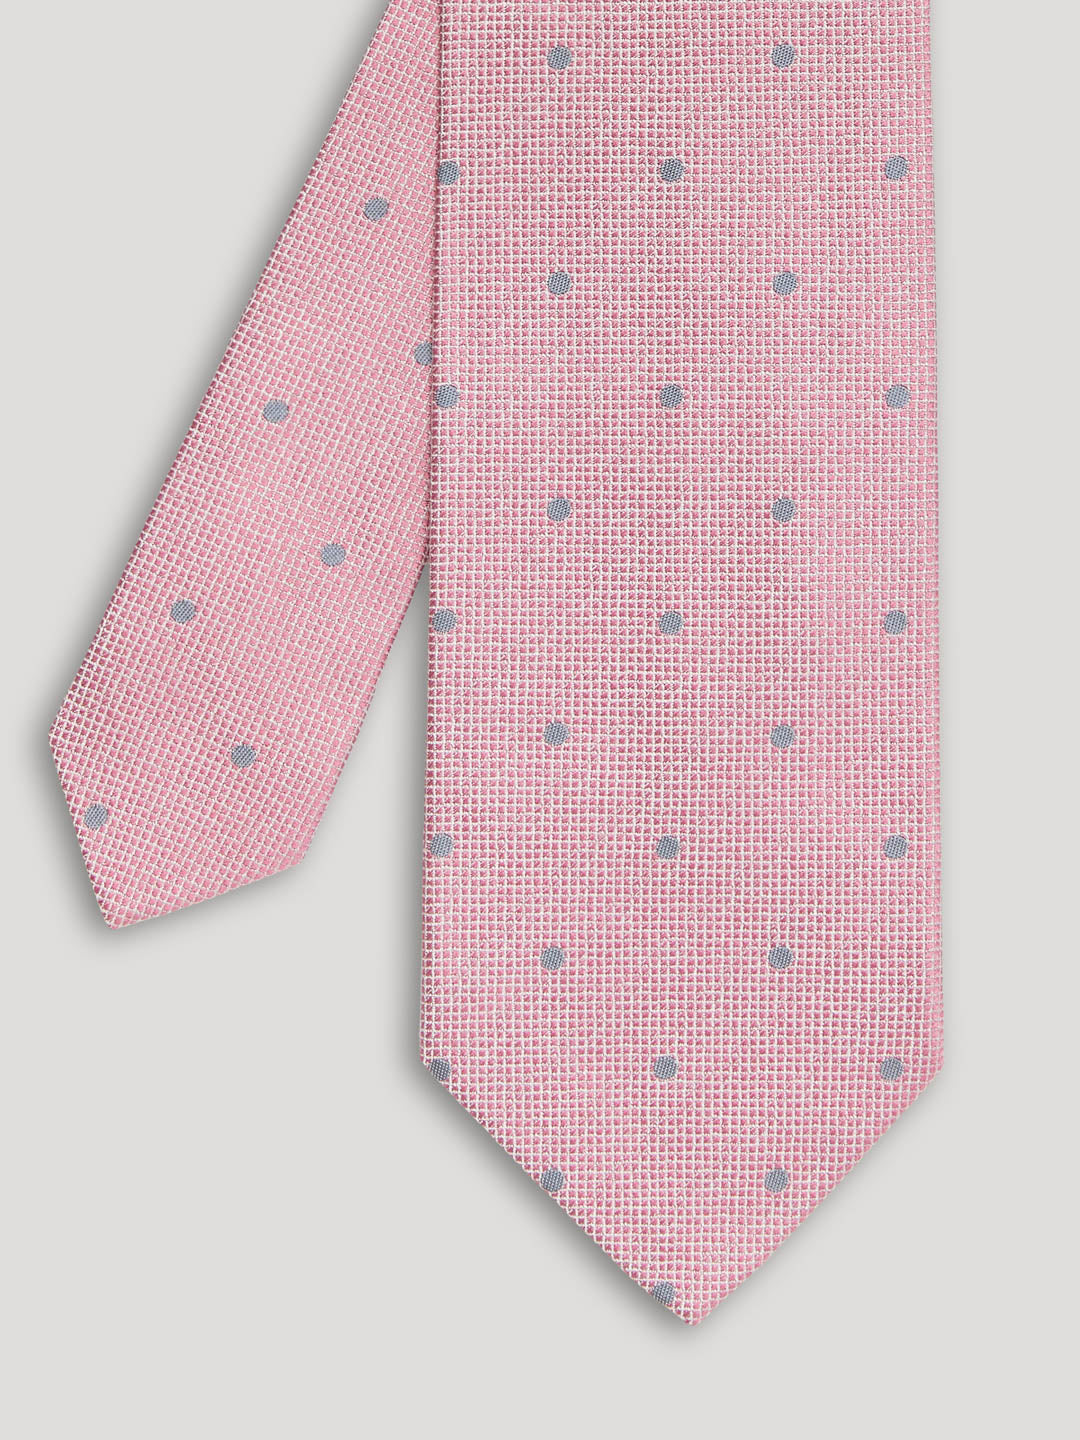 Baby pink tie with grey polkadots. 